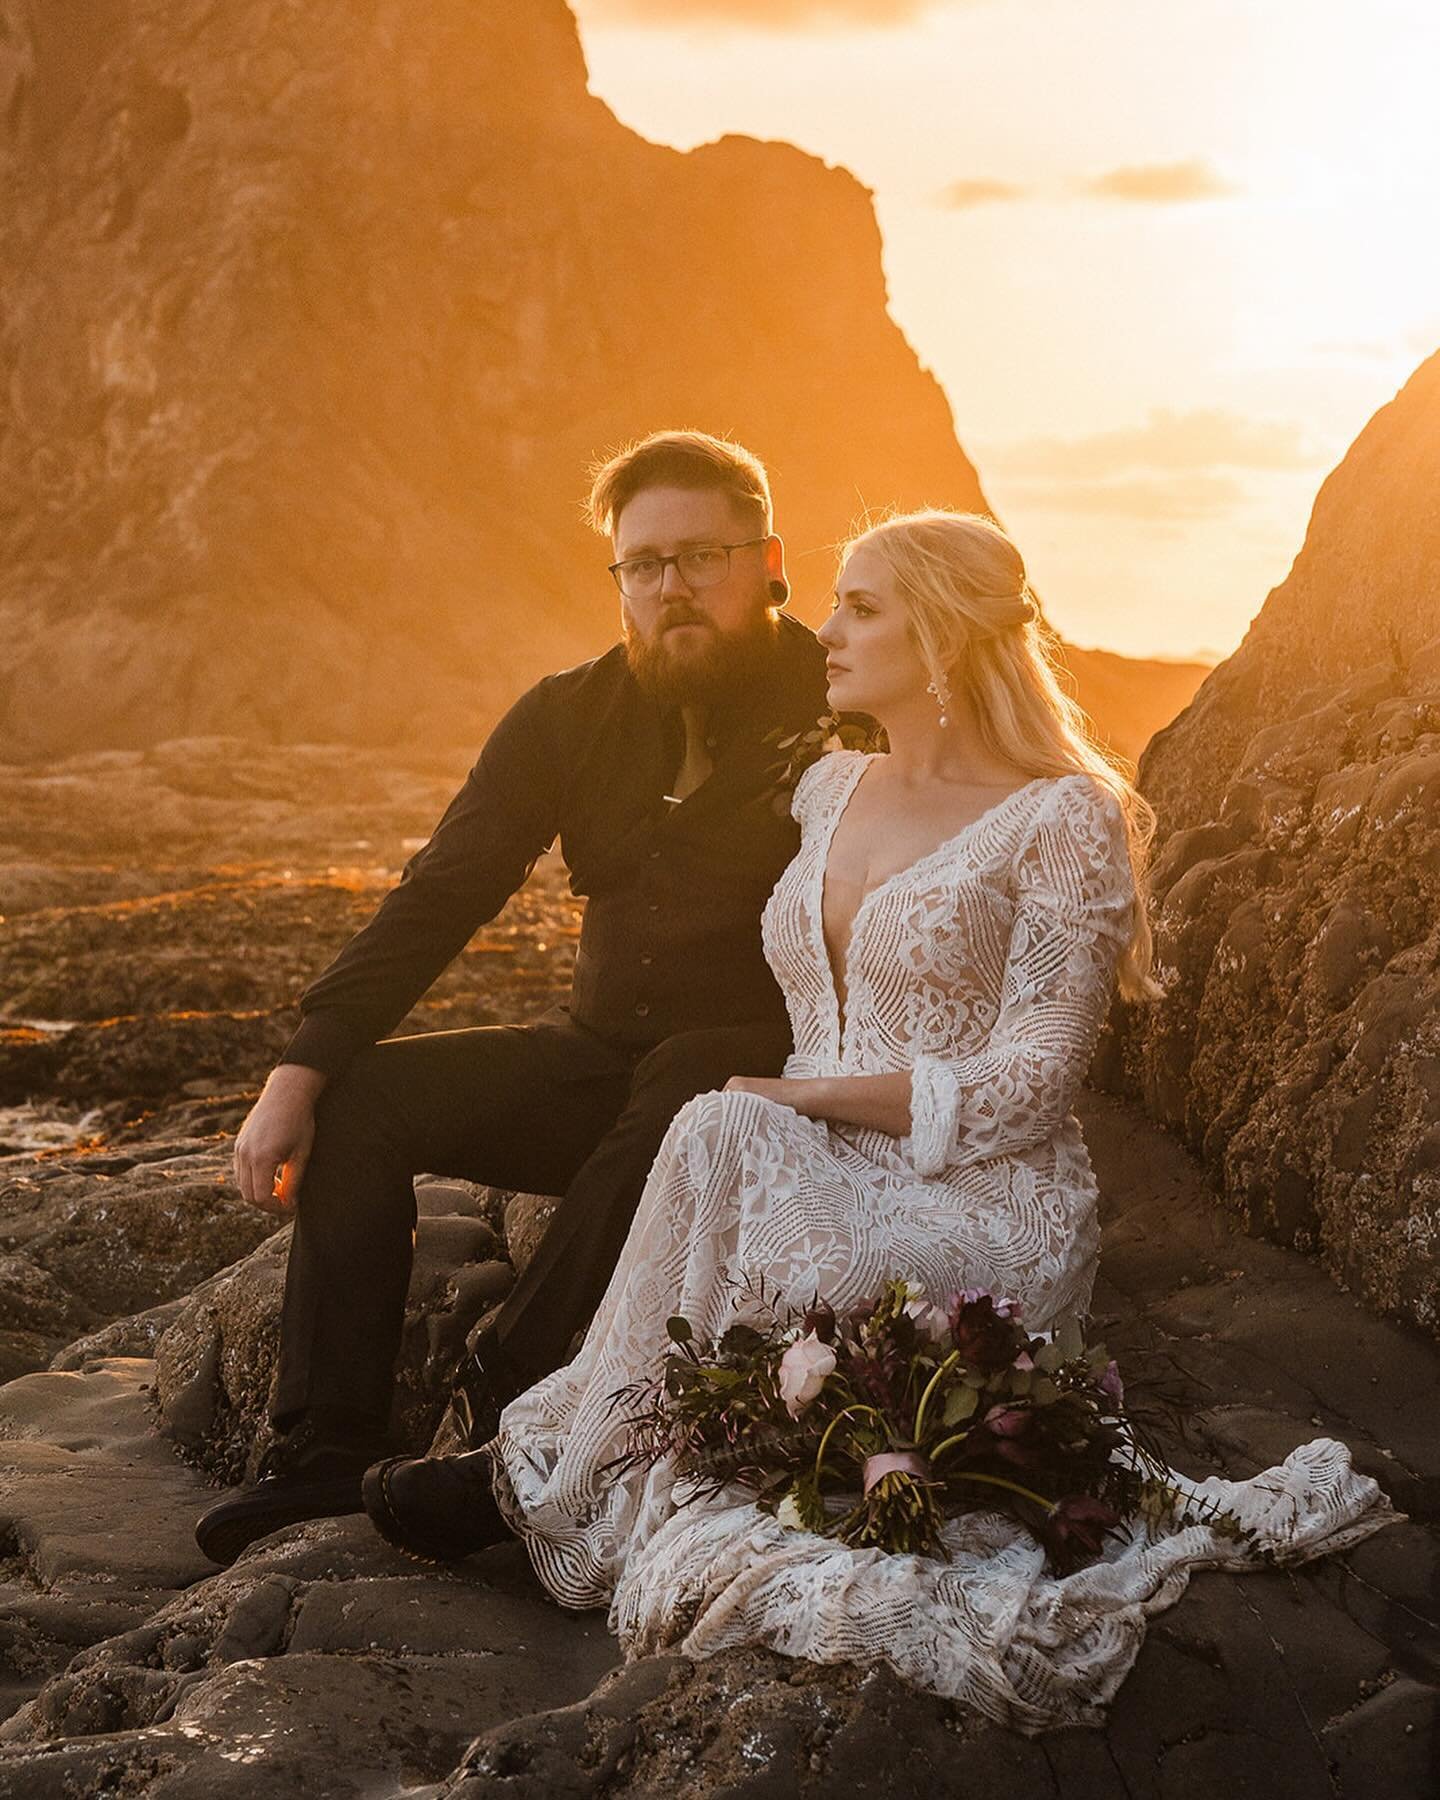 Perfect days on the coast! The Olympic National Park and coastal beaches are tough to beat, especially with a golden hour this insane!
Thank you Chelsea and Aaron for having me out, I&rsquo;m honored to share my bday with your wedding anniversary bec